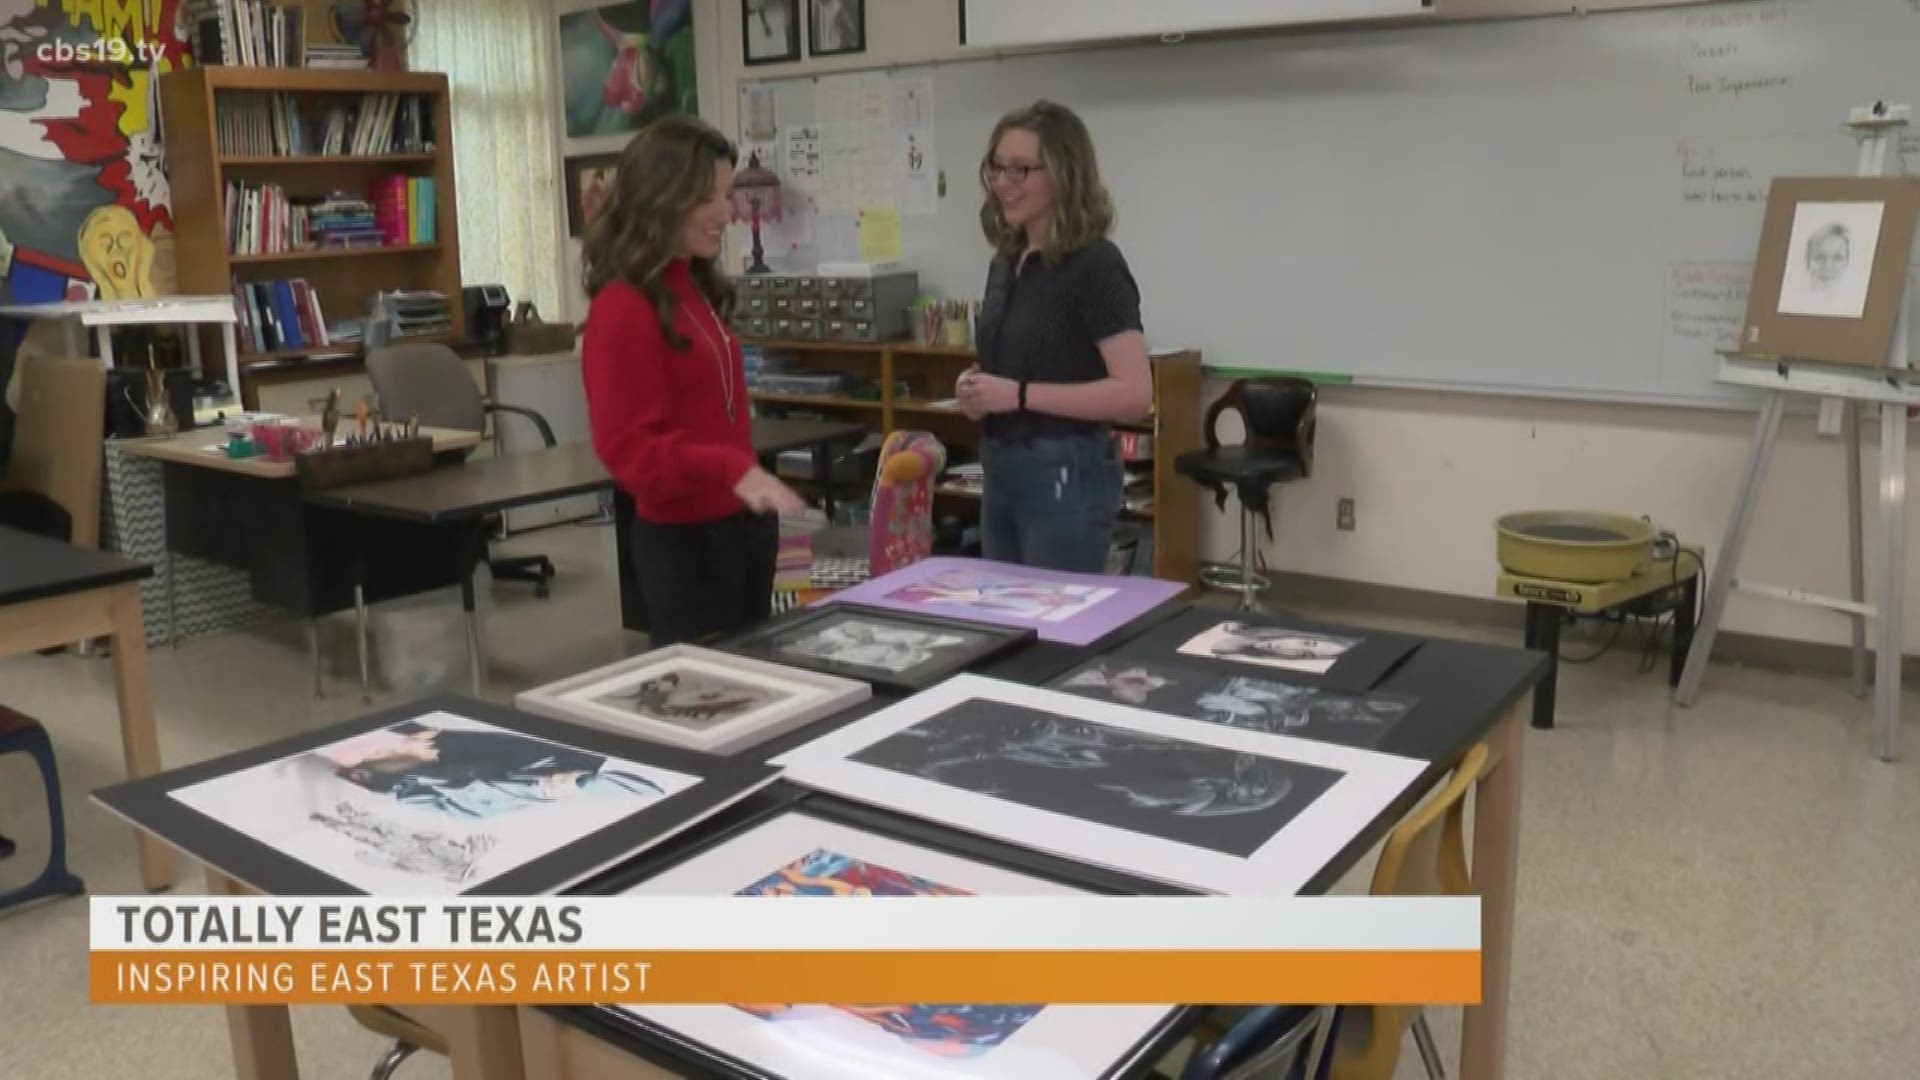 Hayley Jasper, a Hawkins High School student, takes photos and turns them into art. She also expresses herself through abstract, award-winning art.